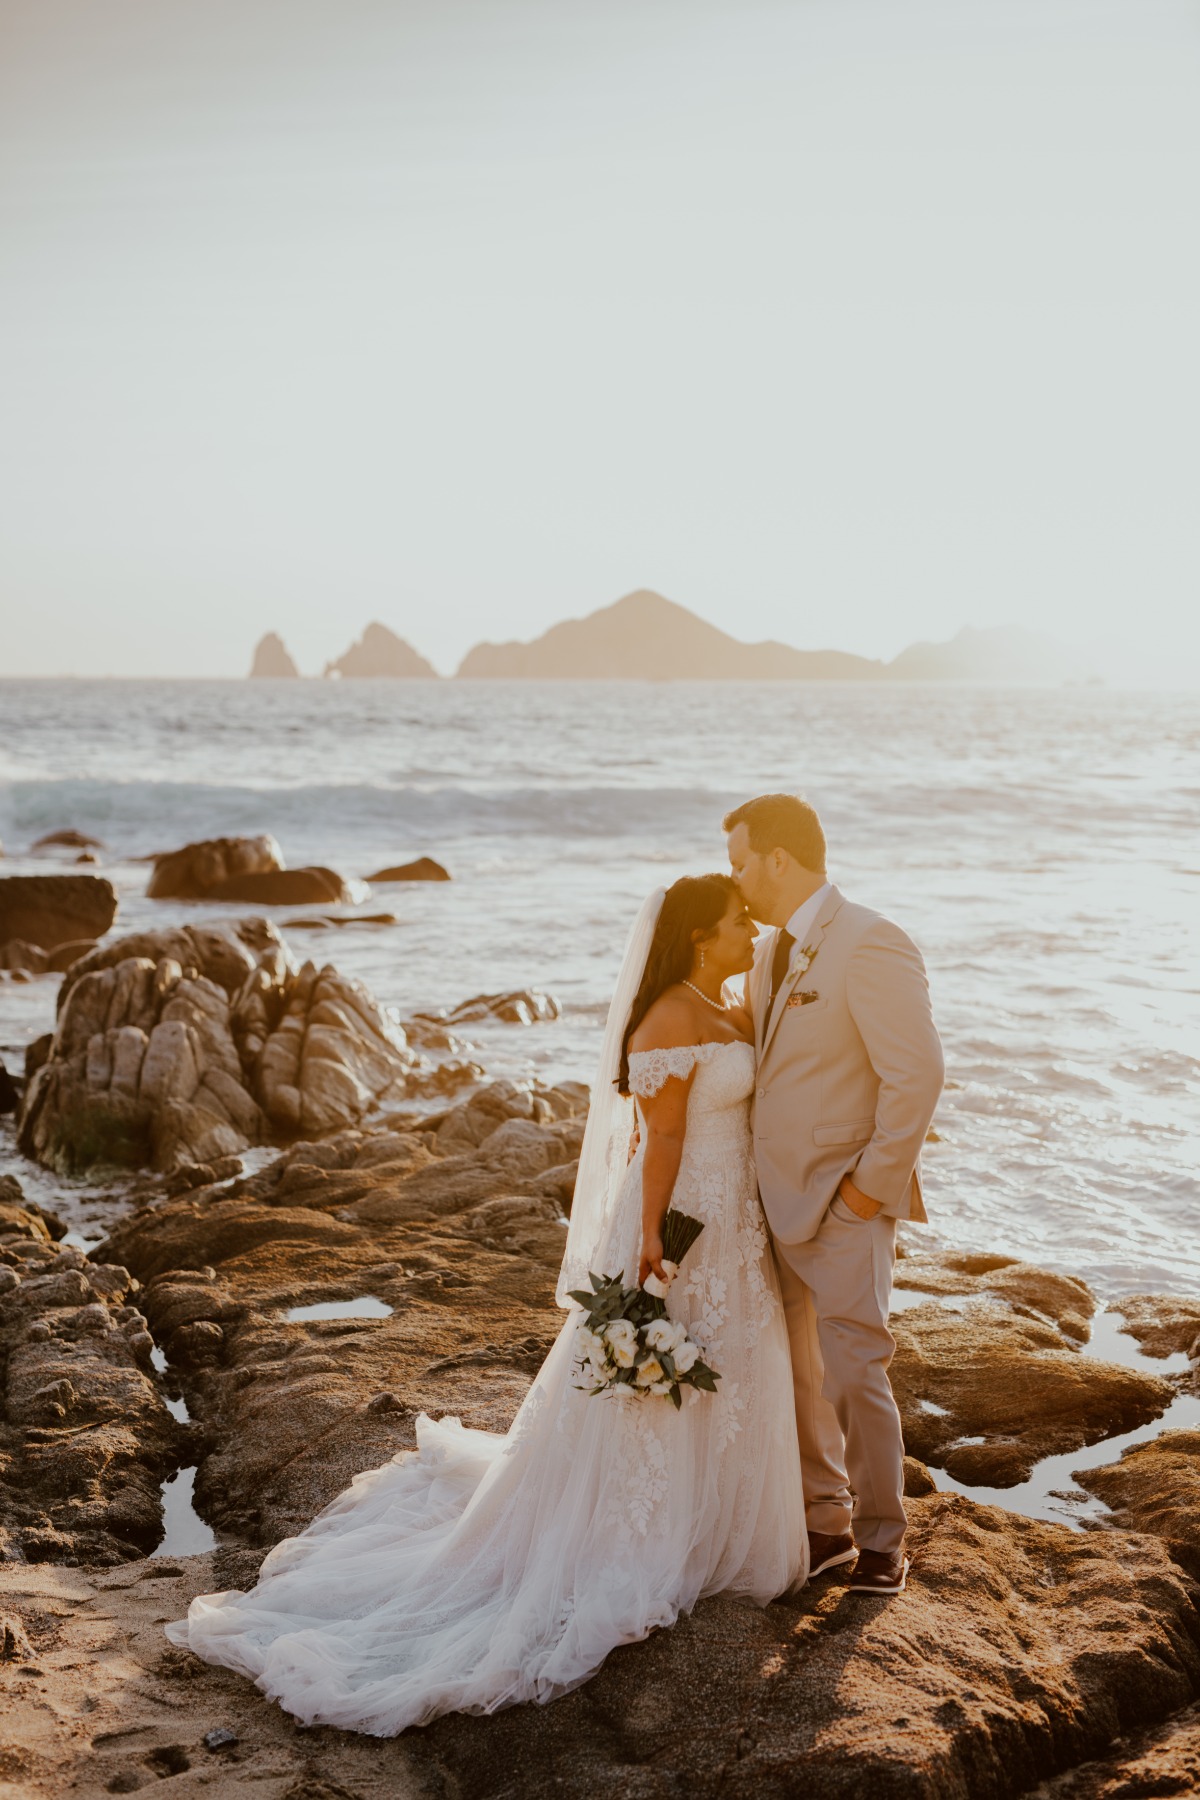 We'll Always Have CaboâA Spring Break Fairytale